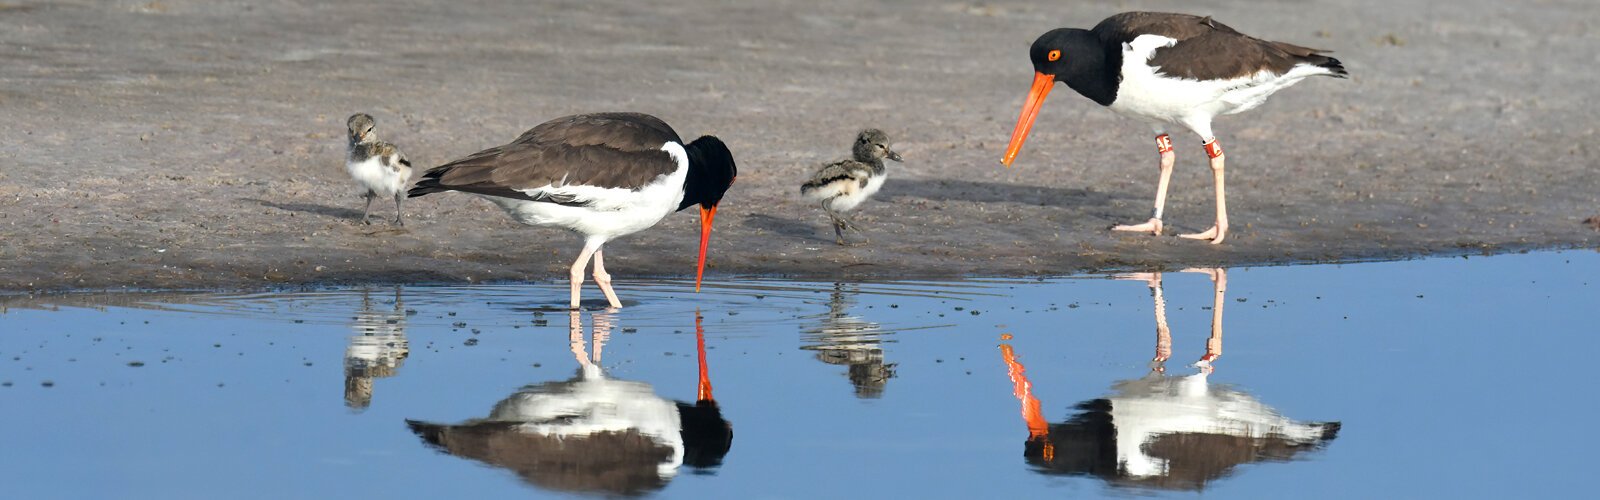 A pair of American oystercatchers forage at a tidal pool on the beach to feed their two-day-old chicks. These birds are one of four state-threatened beach-nesting species that requires particular protection.